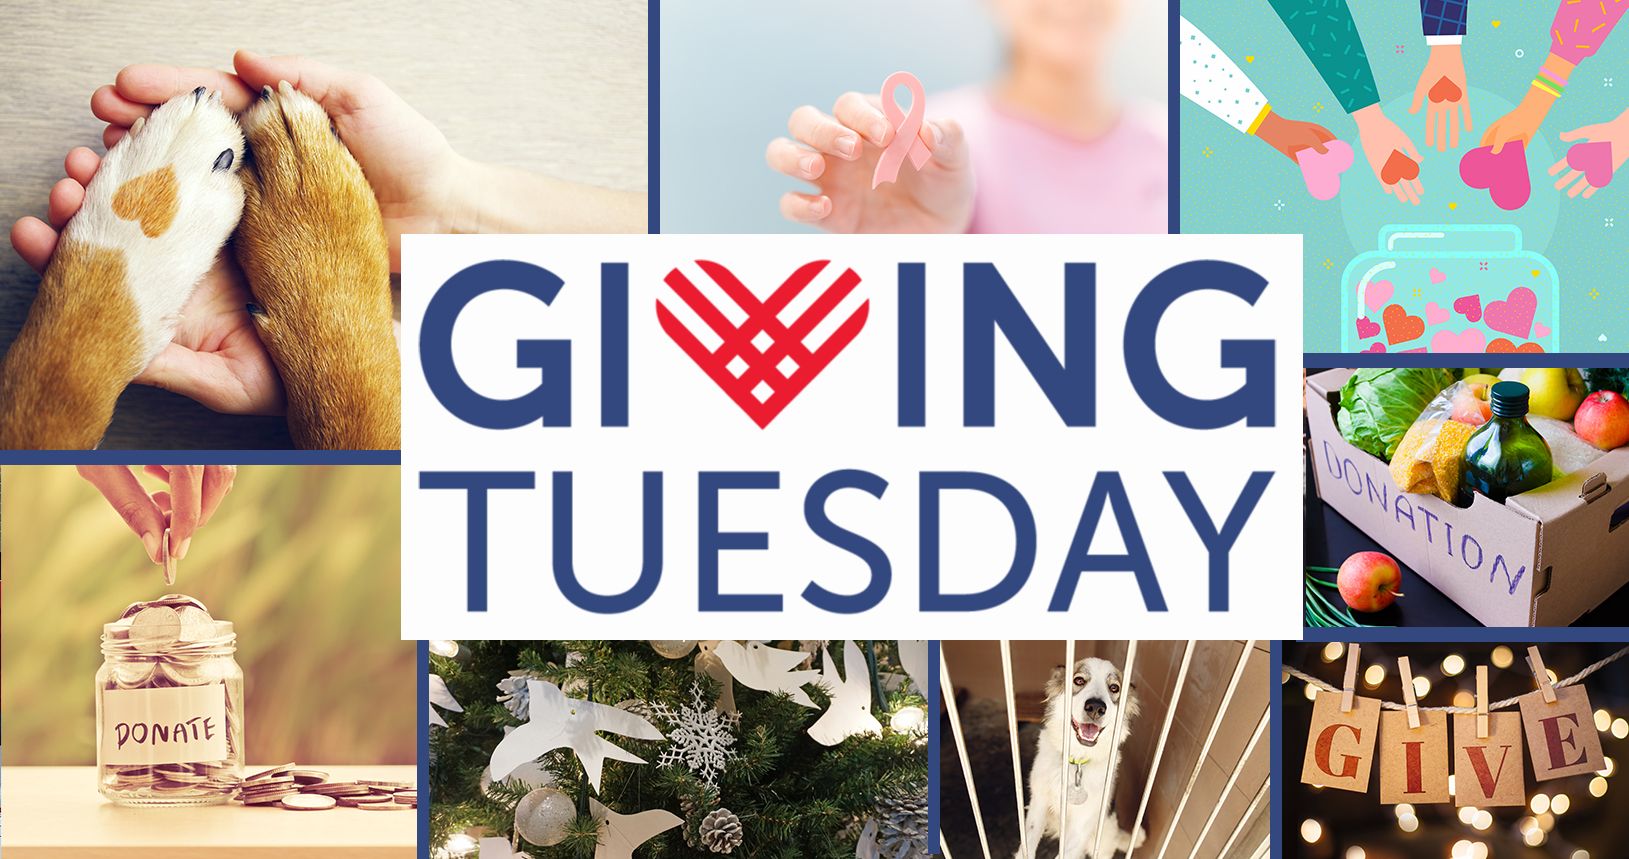 Take Part In Giving Tuesday!